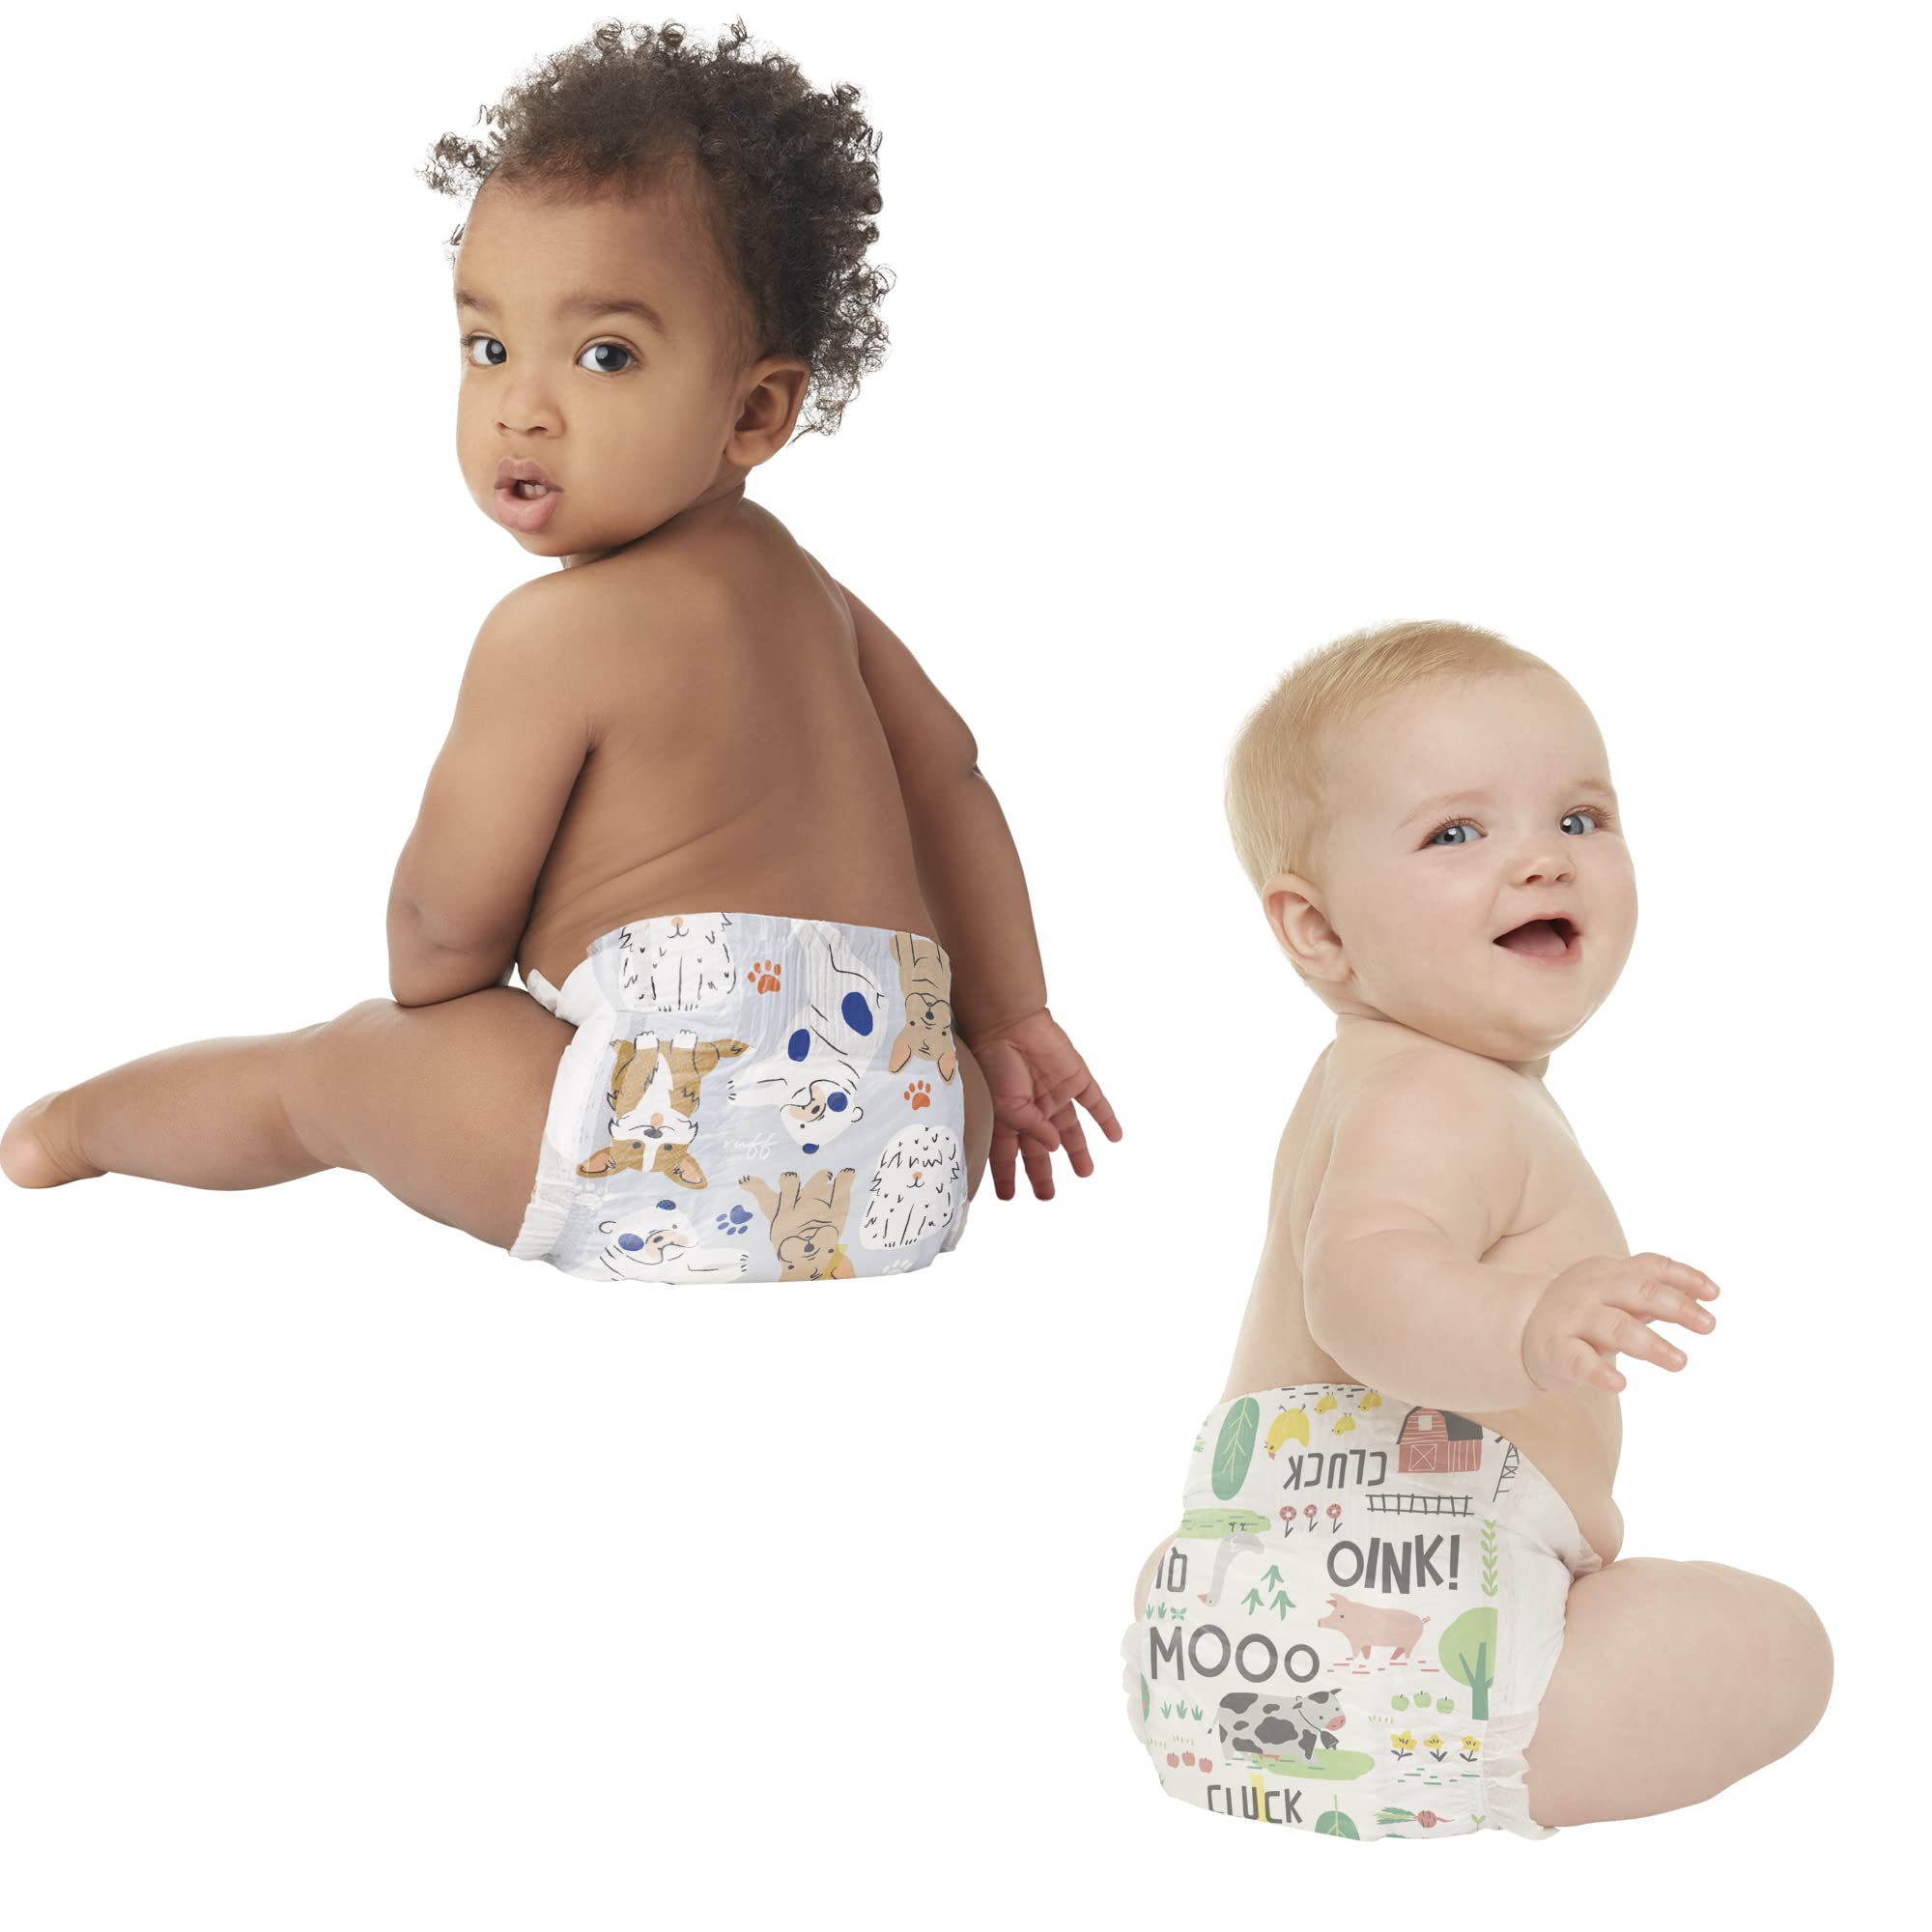 The Honest Company Clean Conscious Diapers | Plant-Based, Sustainable | Barnyard Babies + It’s A Pawty | Super Club Box, Size 7 (41+ lbs), 64 Count